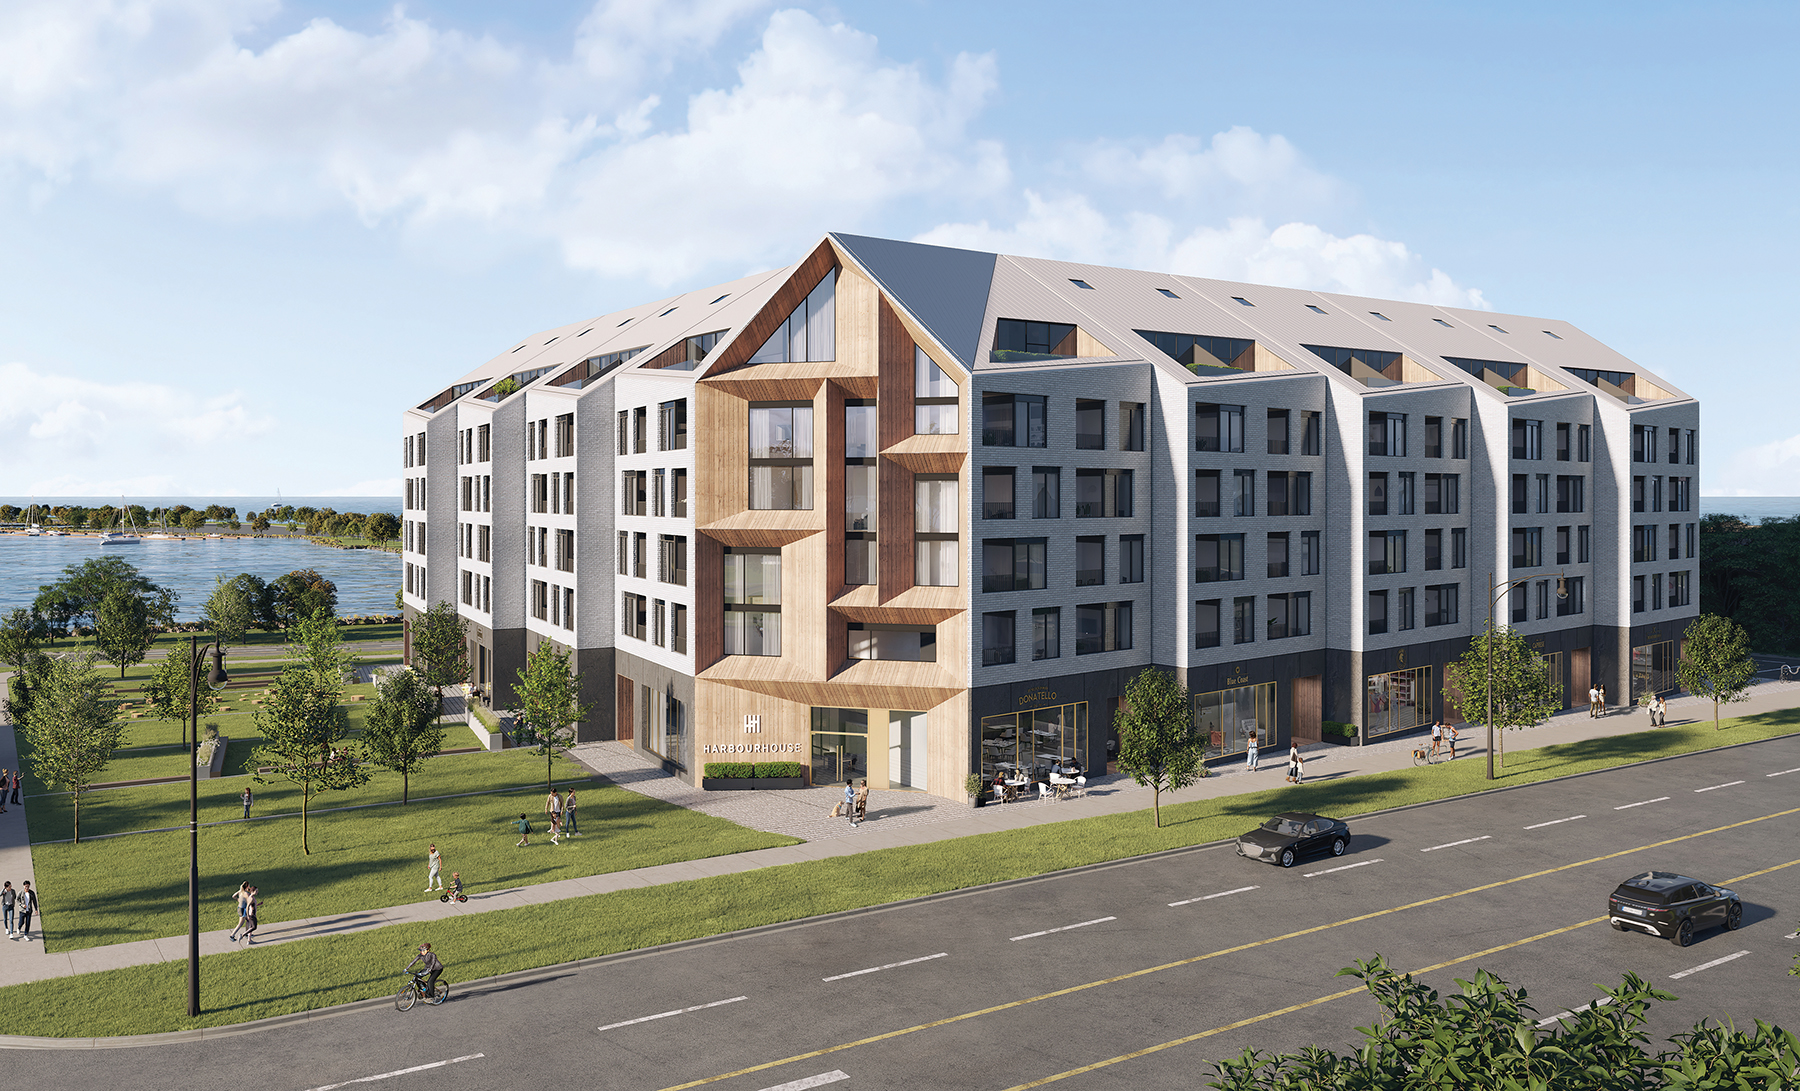 Harbour House Collingwood will be a six-storey residential/commercial building with ground floor commercial space and 130 condominium apartments.